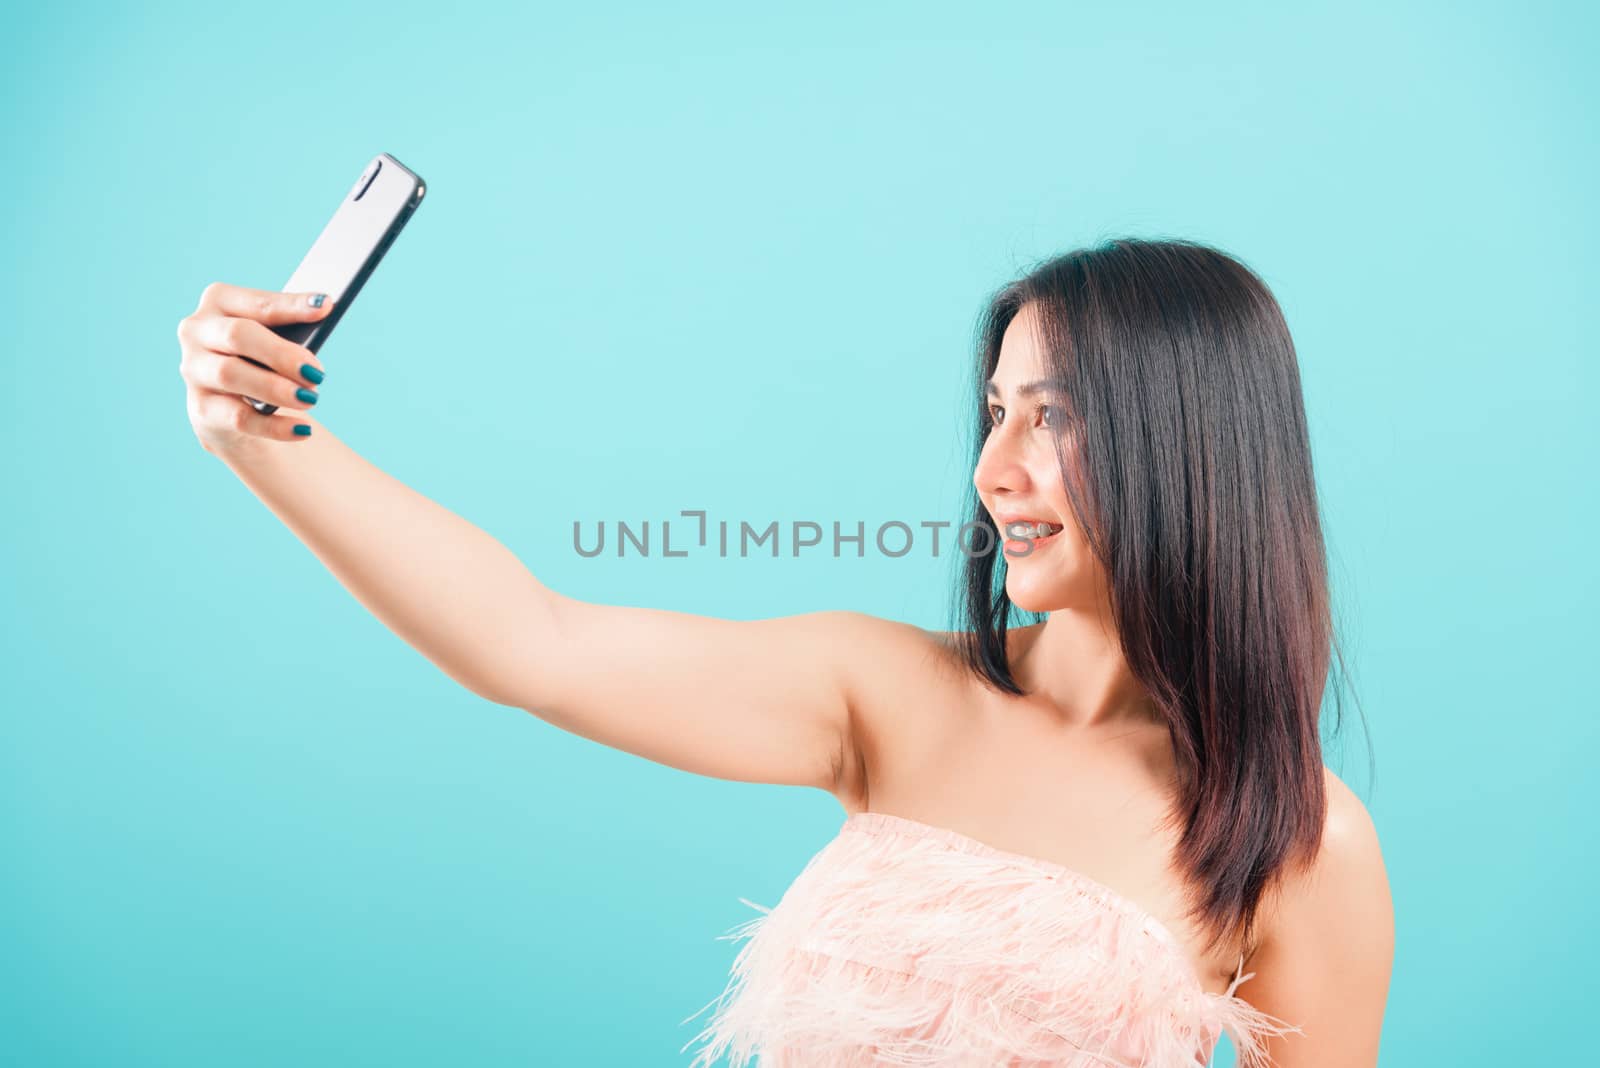 Smiling face portrait asian beautiful woman her standing making selfie photo on smartphone on blue background